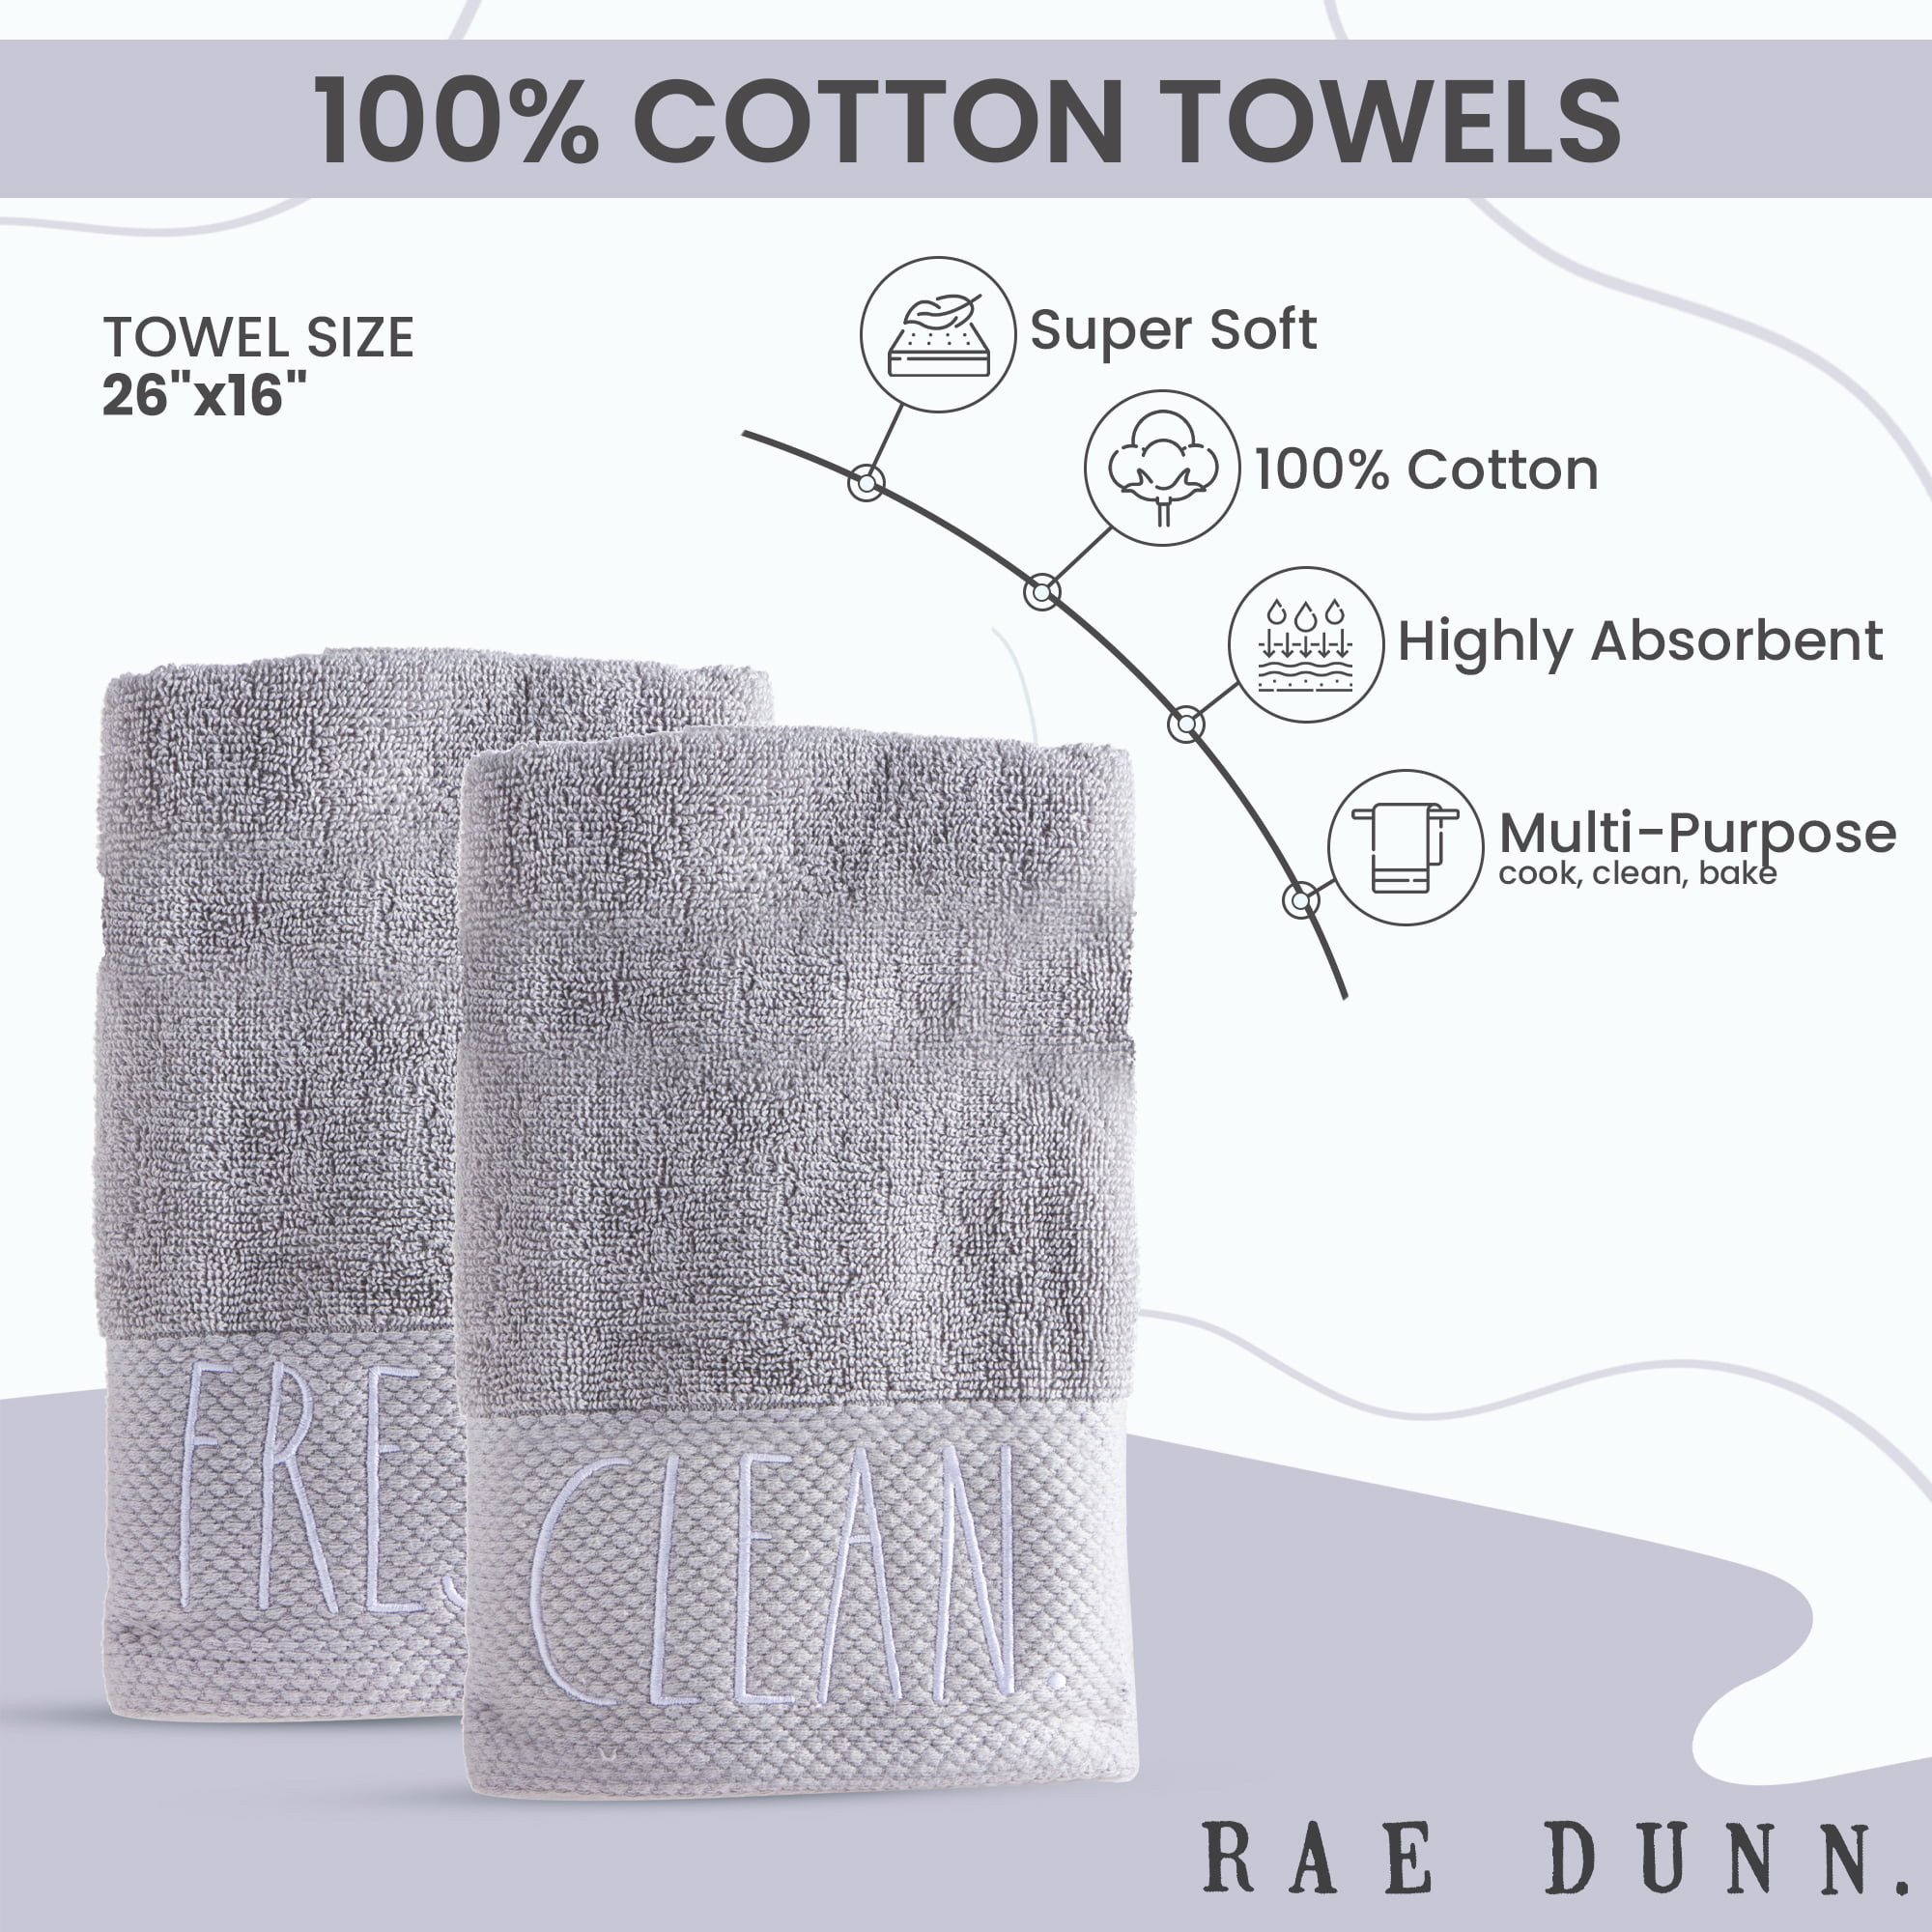 Rae Dunn Hand Towels, Embroidered Decorative Kitchen Towel for Kitchen and Bathroom, 100% Cotton, Highly Absorbent, 3 Pack, 16x2